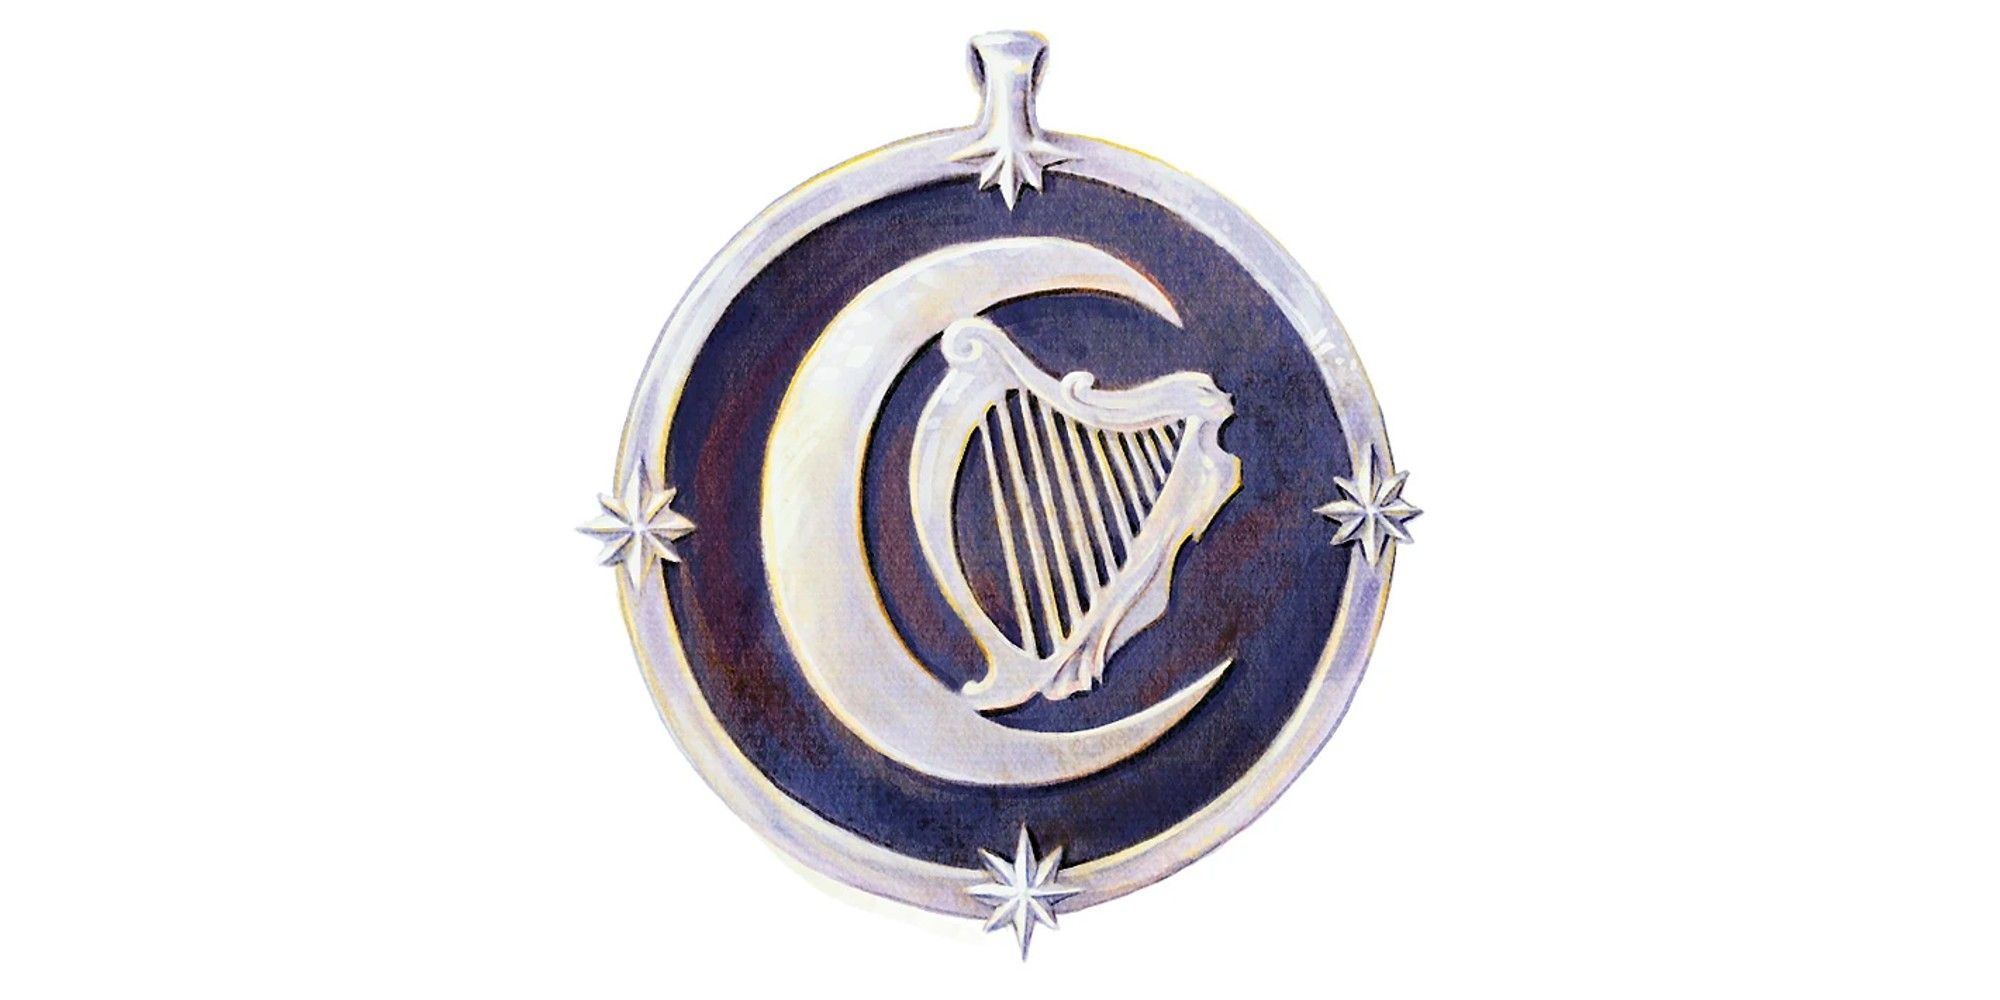 Dungeons & Dragons image showing a Harper pin, with their symbol the crescent moon and harp